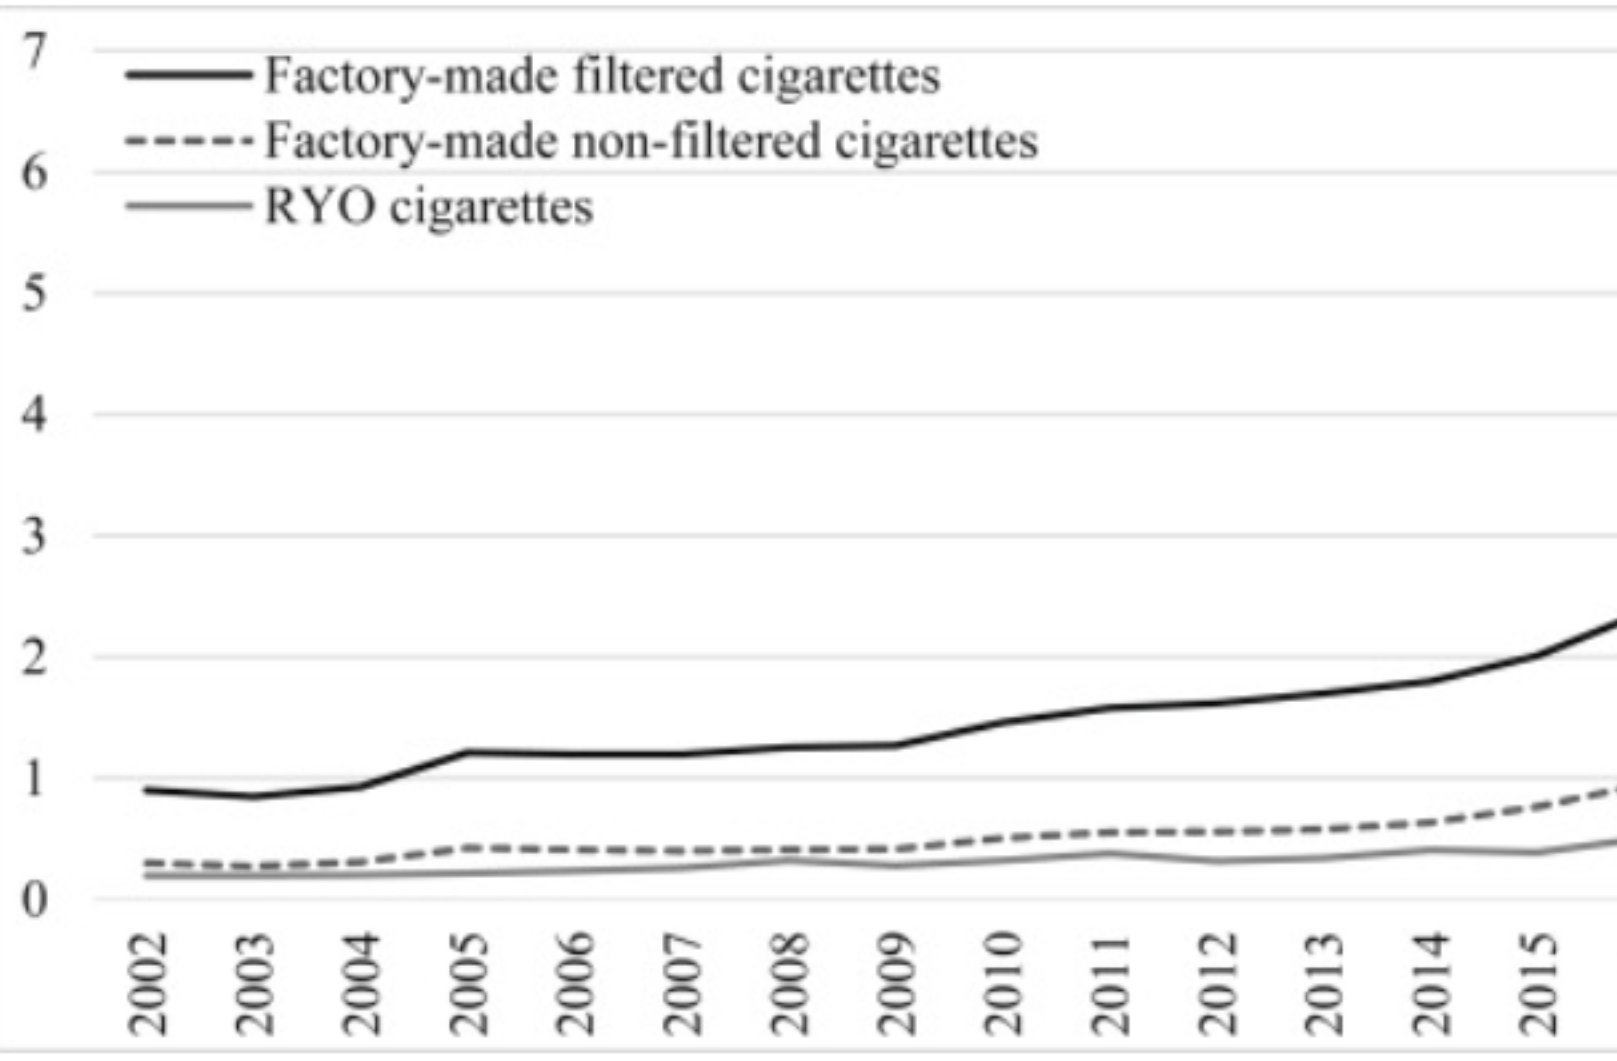 Graph showing rise of factory made filtered cigarettes